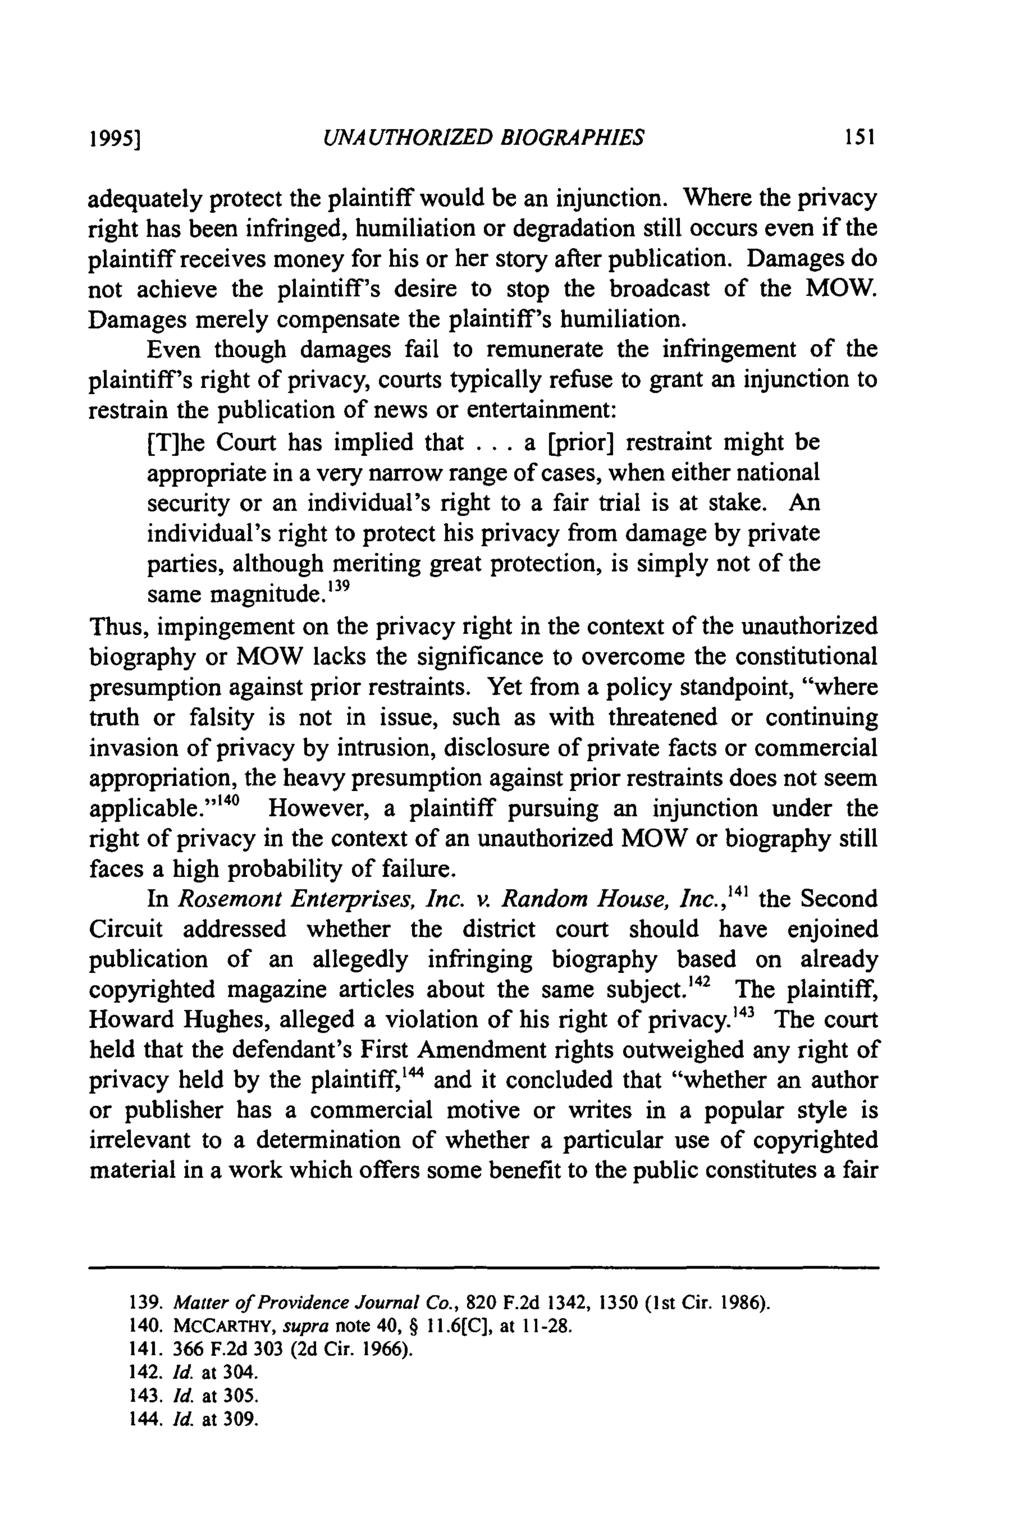 1995] UNAUTHORIZED BIOGRAPHIES adequately protect the plaintiff would be an injunction.